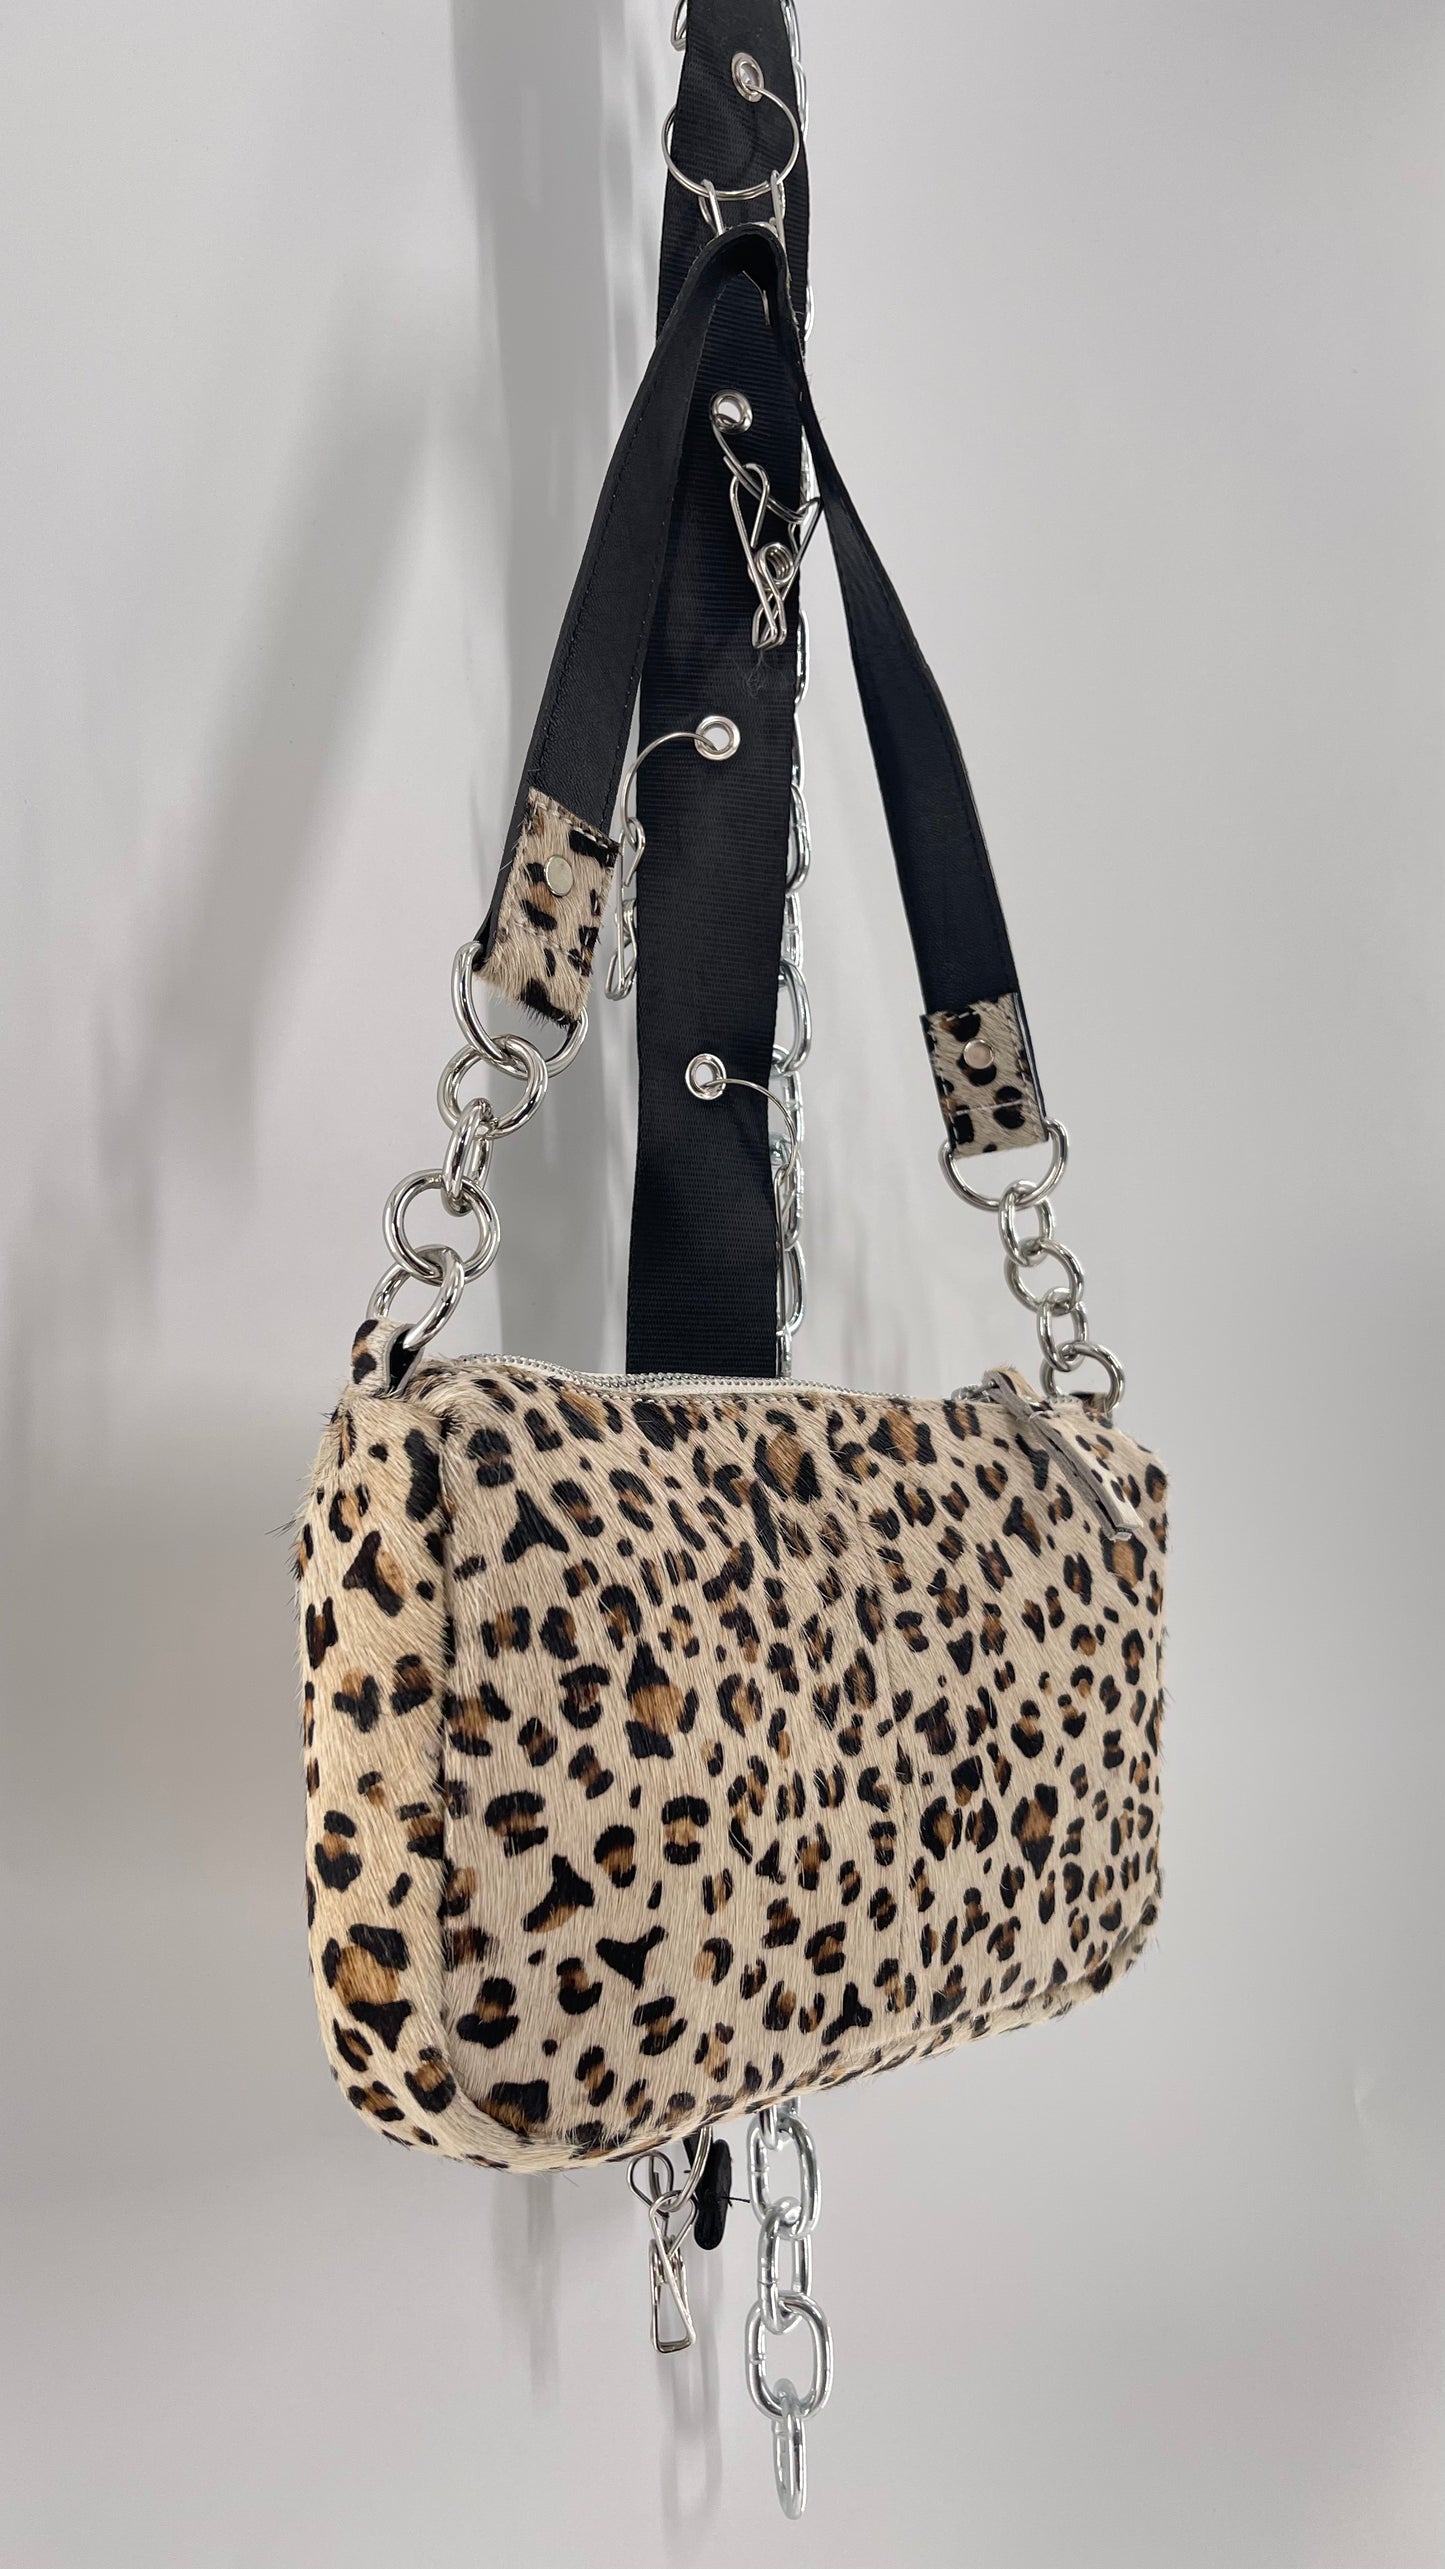 Free People Cheetah Print Textured Purse with Chain Strap